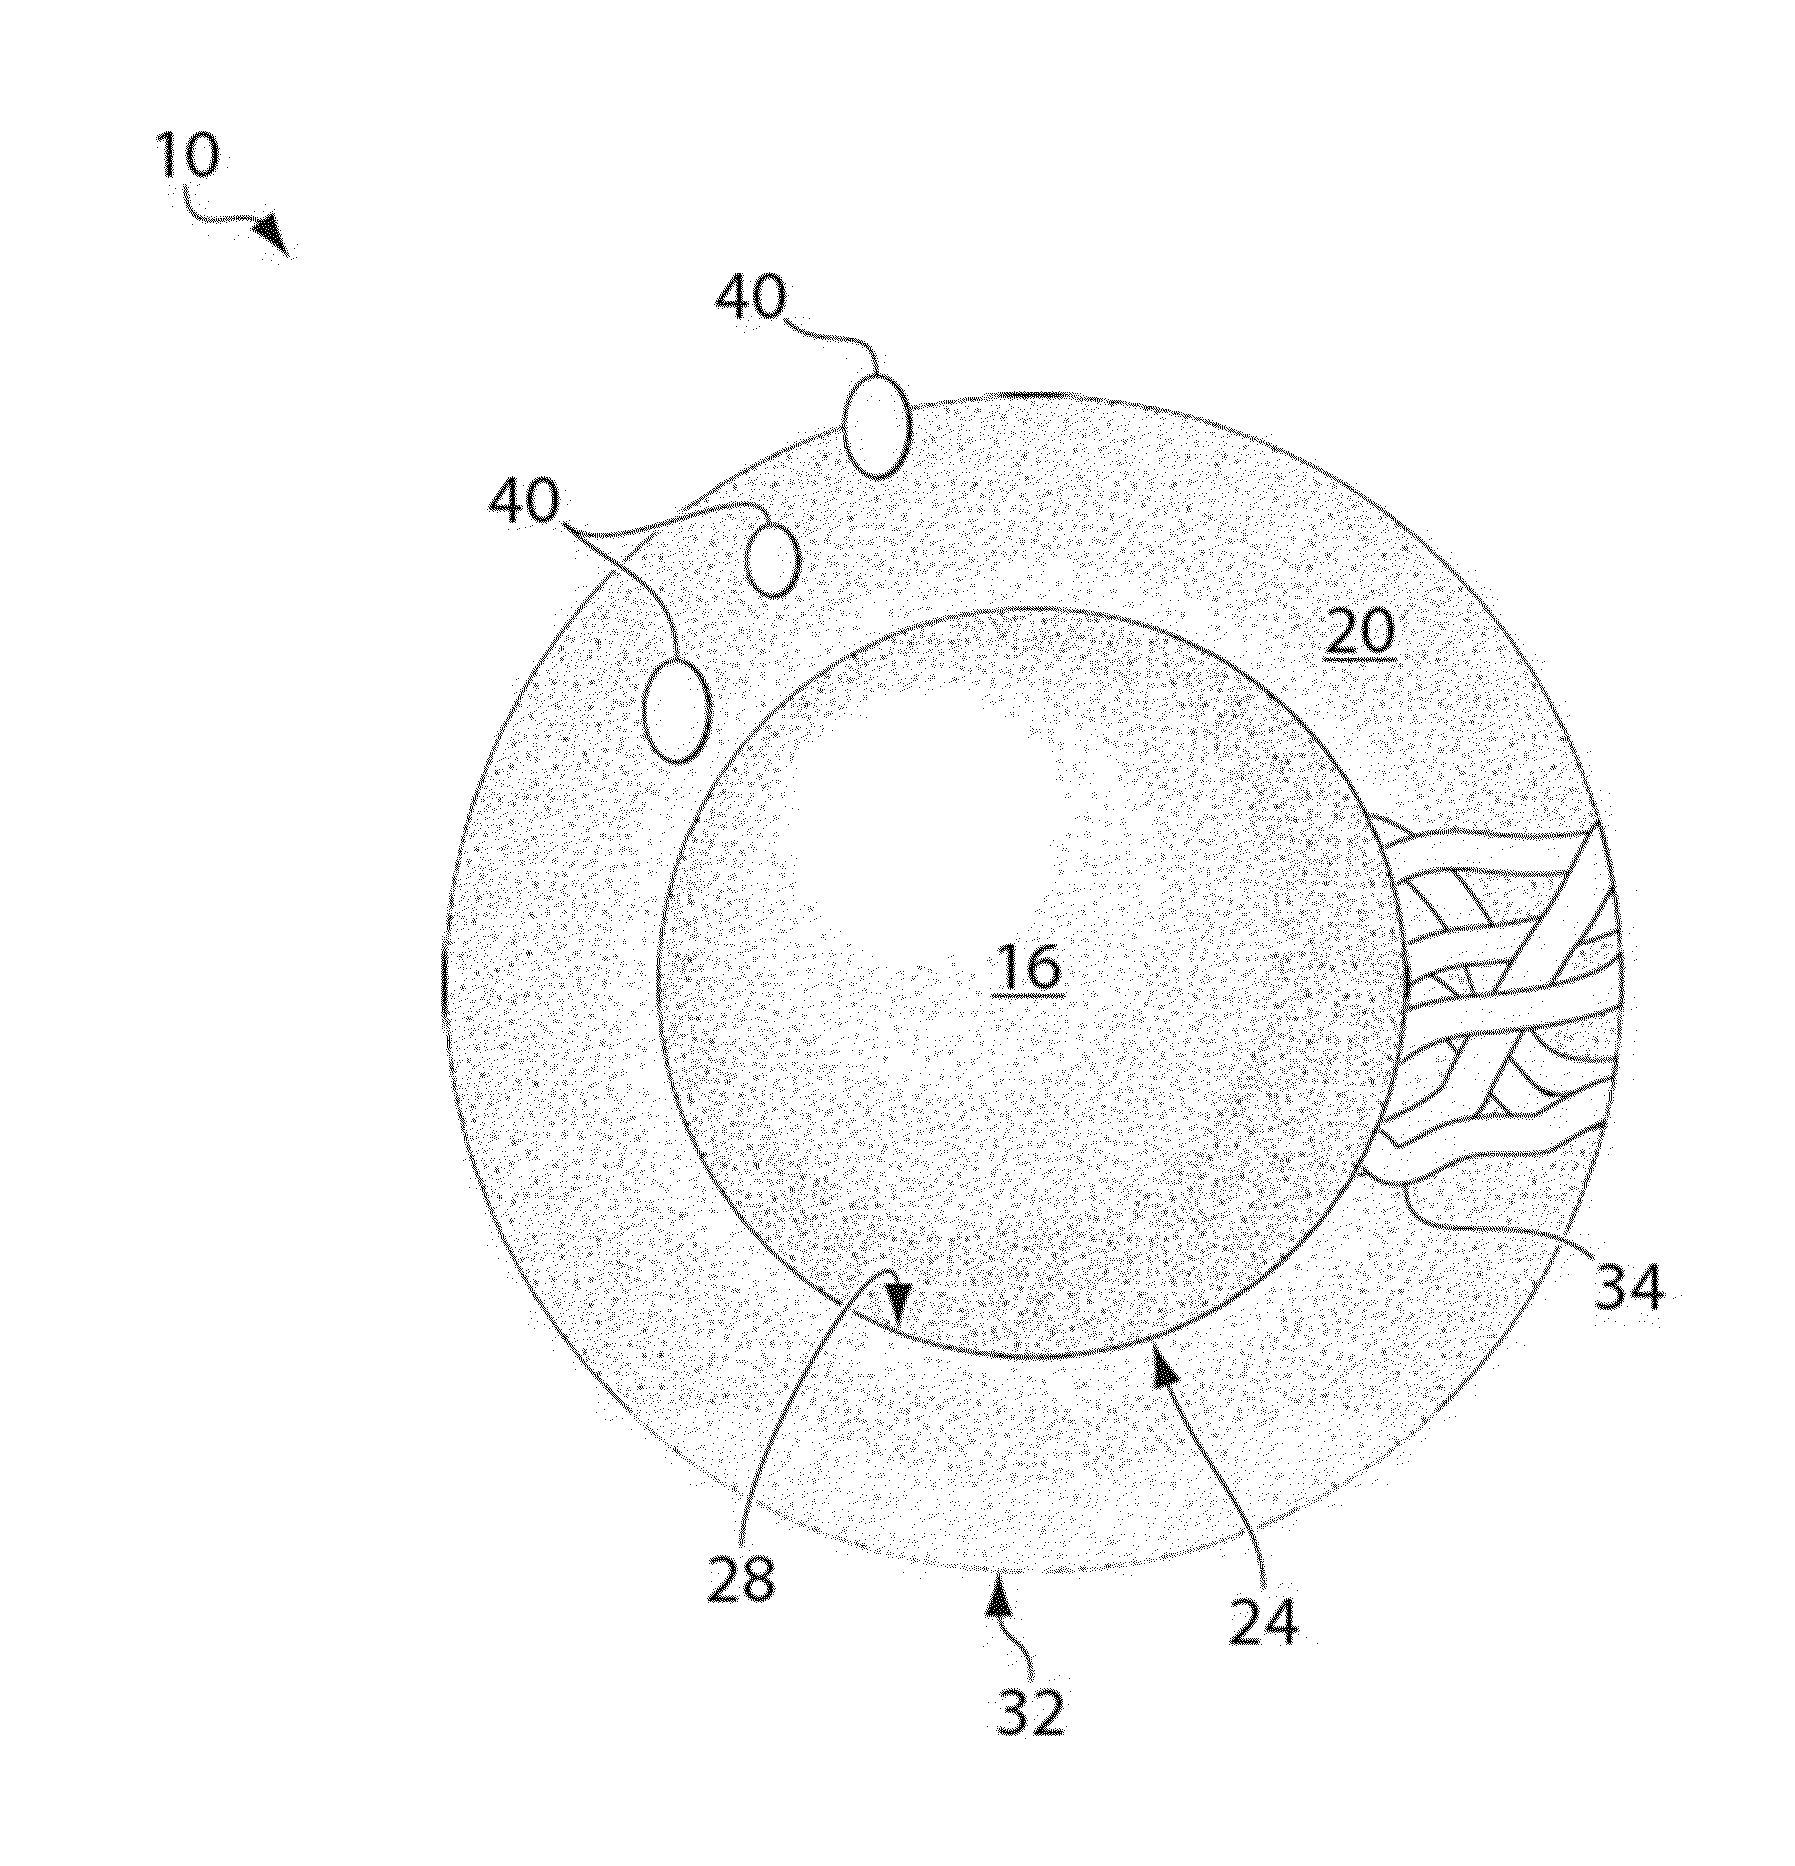 Compositions and methods utilizing poly(vinyl alcohol) and/or other polymers that aid particle transport in mucus